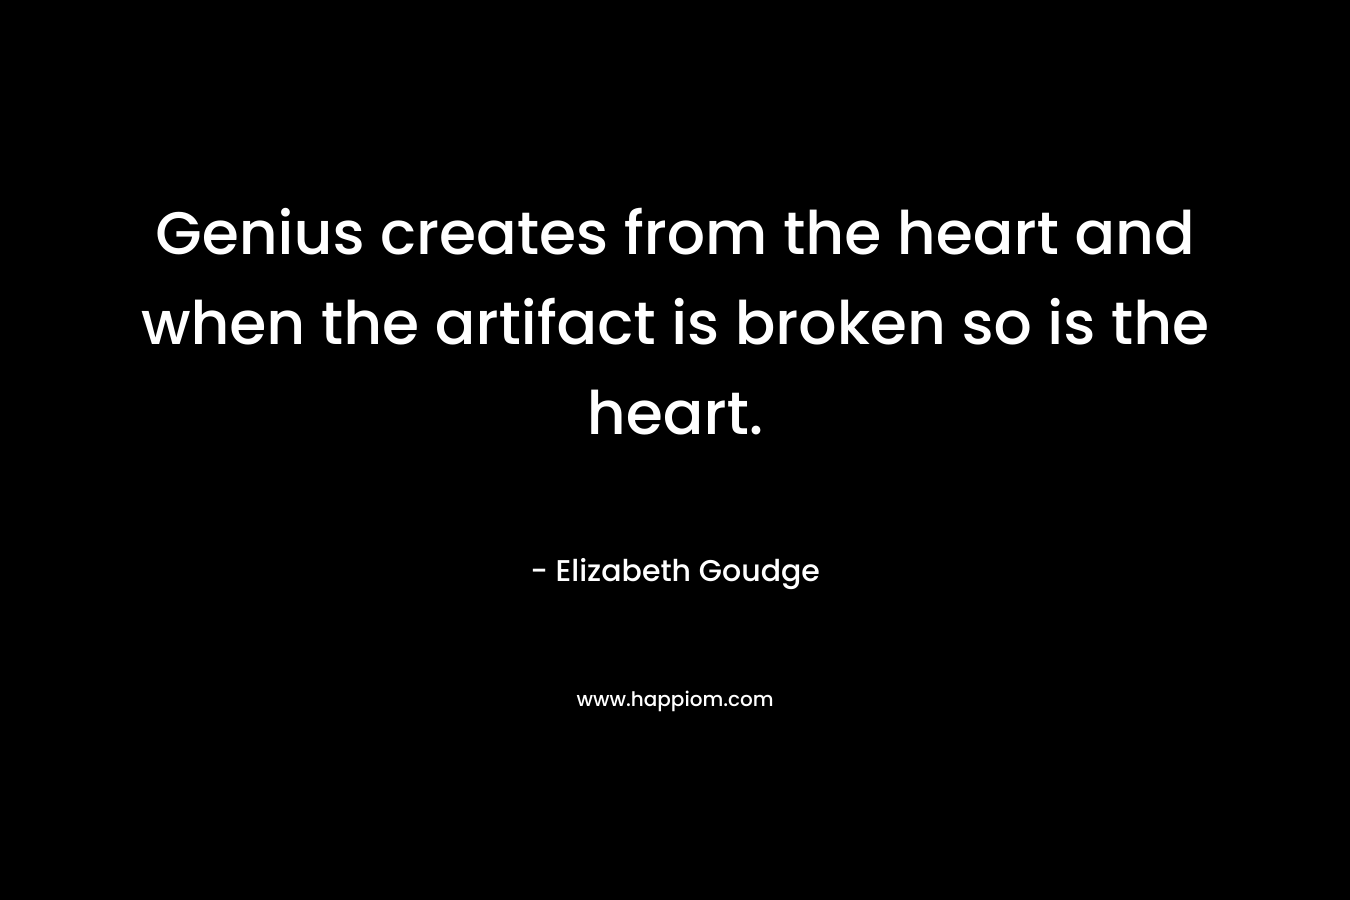 Genius creates from the heart and when the artifact is broken so is the heart. – Elizabeth Goudge